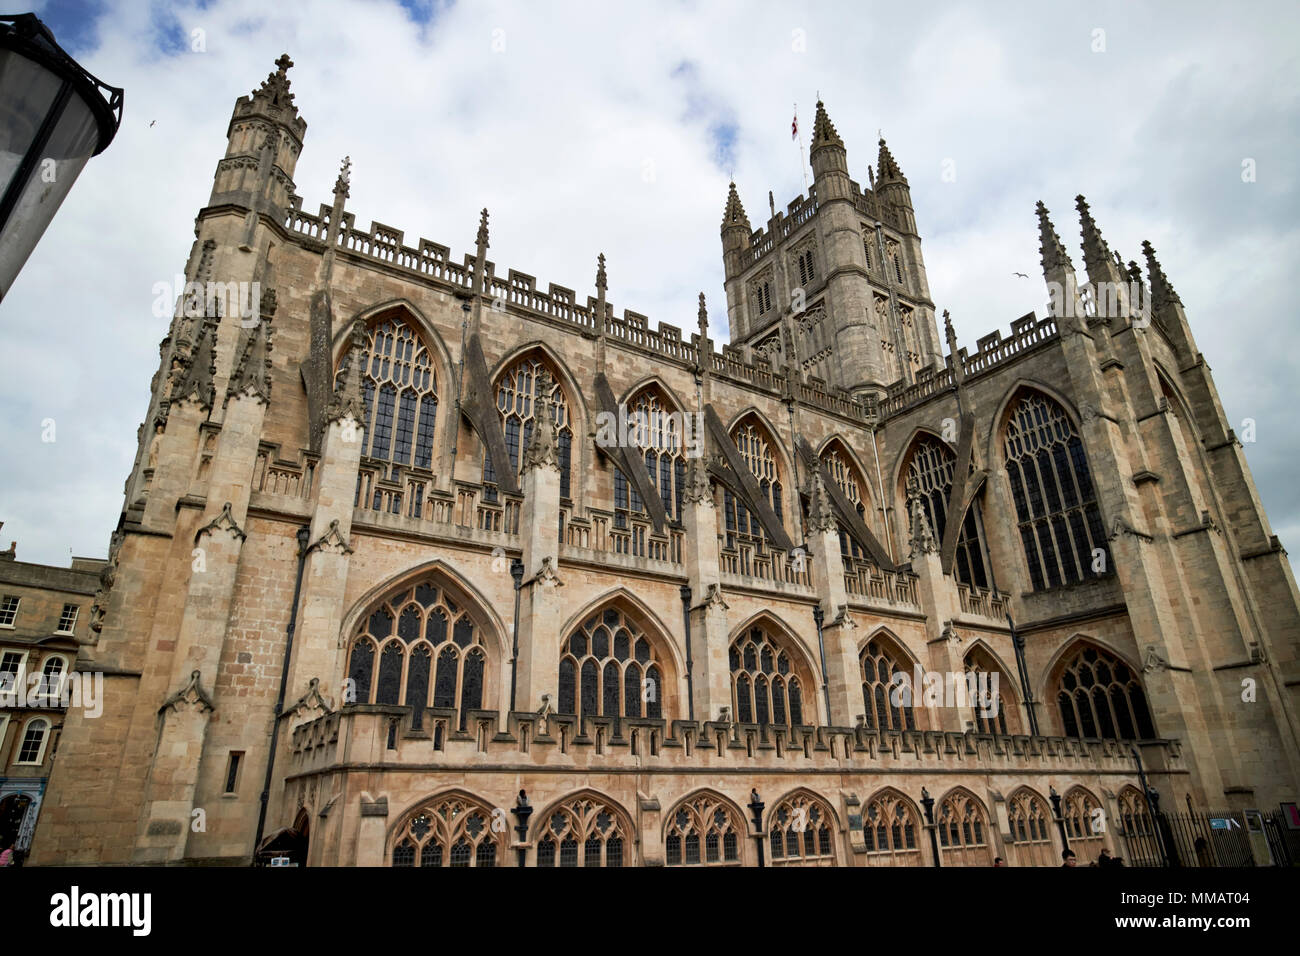 side view looking up at flying buttresses, battlements, pinnacles and parapets beneath the tower of gothic bath abbey Bath England UK Stock Photo